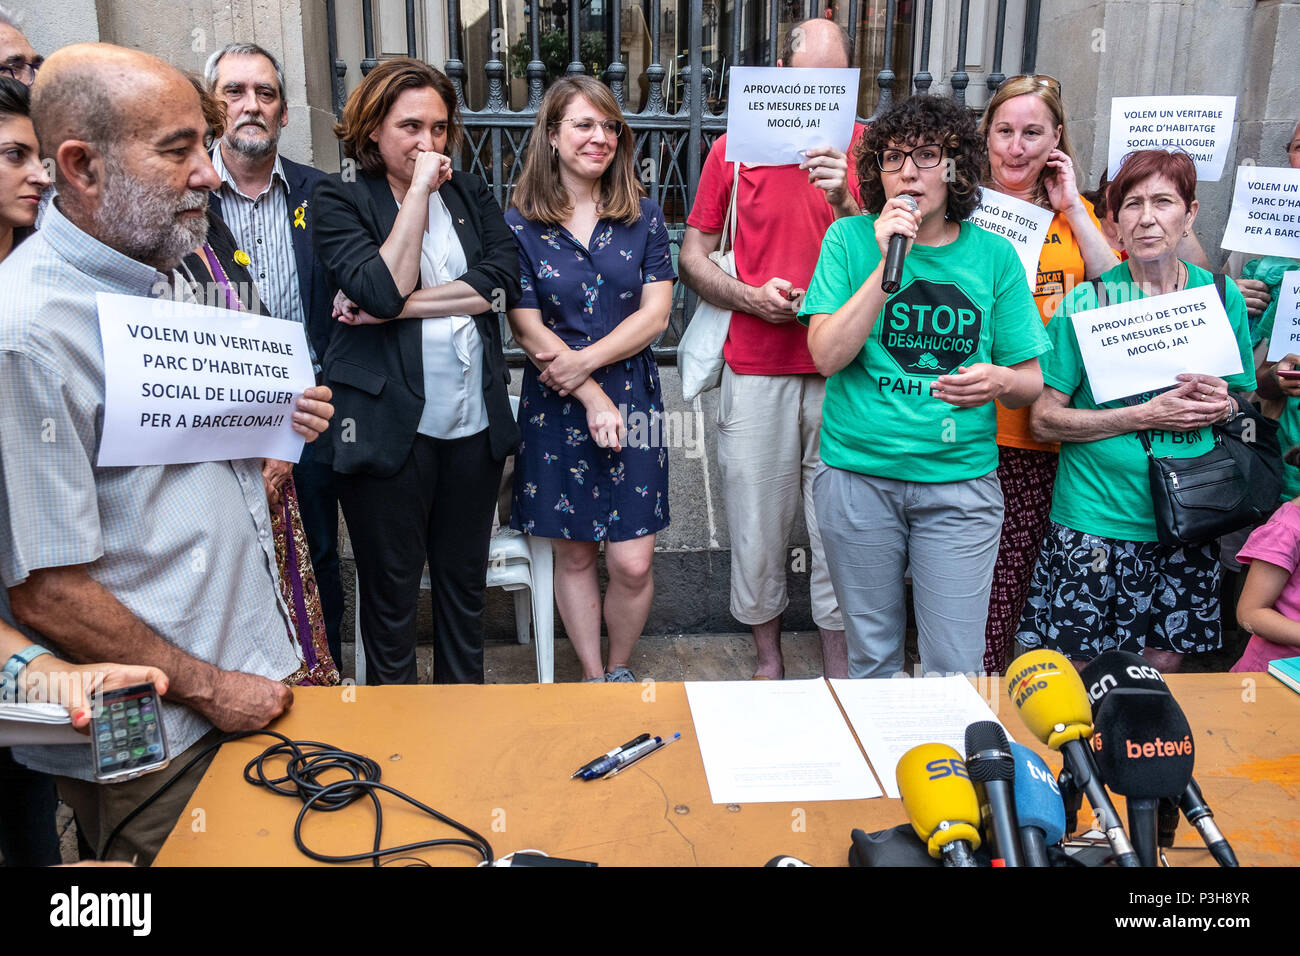 June 18, 2018 - Barcelona, Catalonia, Spain - The mayor Ada Colau and the director of the area of urbanism, Janet Sanz, are seen accompanying the social entities during the signing of the agreement. Thanks to the impulse of the groups that defend the right to housing, the proposal to force the real estate developers to allocate 30% of the promotion to social rent housing is going forward. The mayor Ada Colau and various entities for public housing have staged outside Barcelona City Council the signing of the agreement that now must go through different institutional procedures to be finally ap Stock Photo